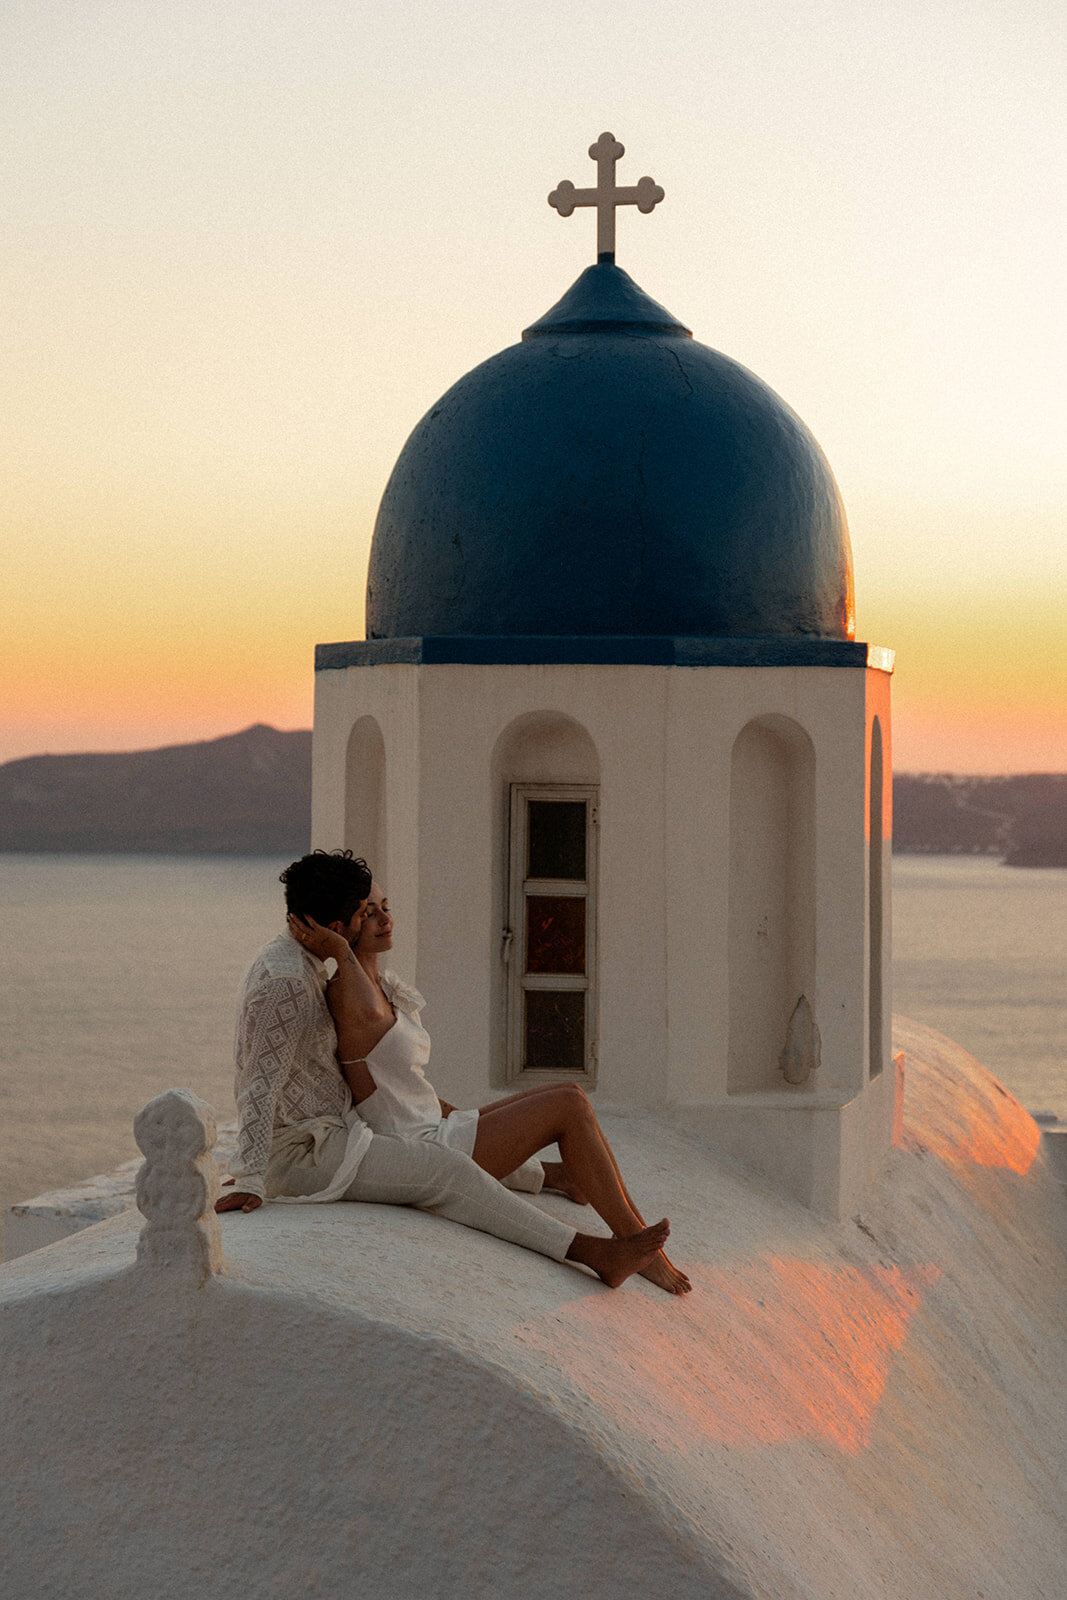 santorini-greece-cathedral-elopement-blue-dome-romantic-timeless-sunset-europe-390